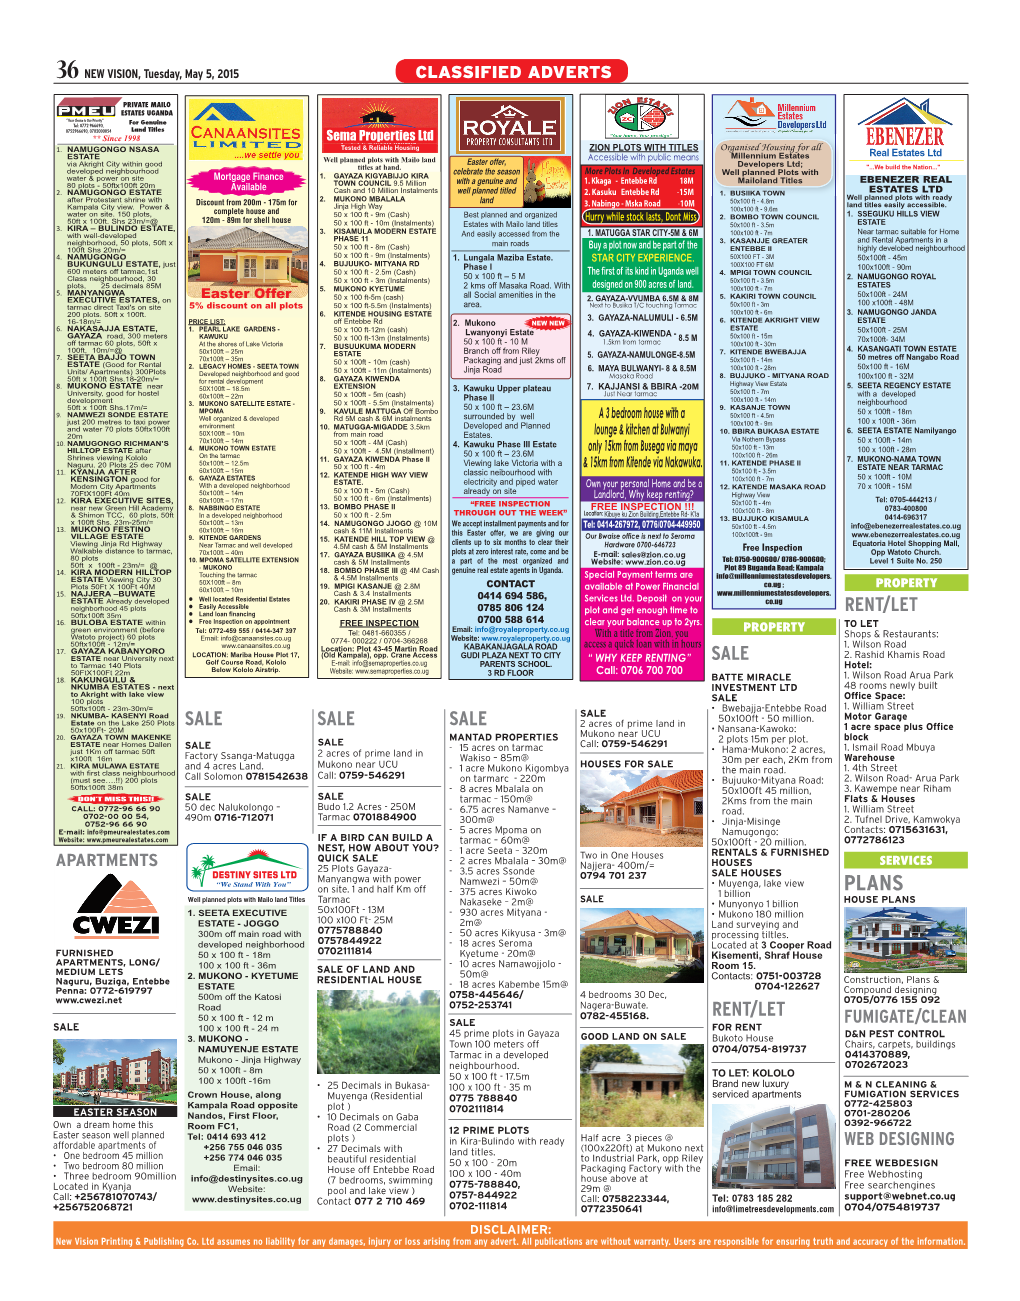 36 NEW VISION, Tuesday, May 5, 2015 CLASSIFIED ADVERTS